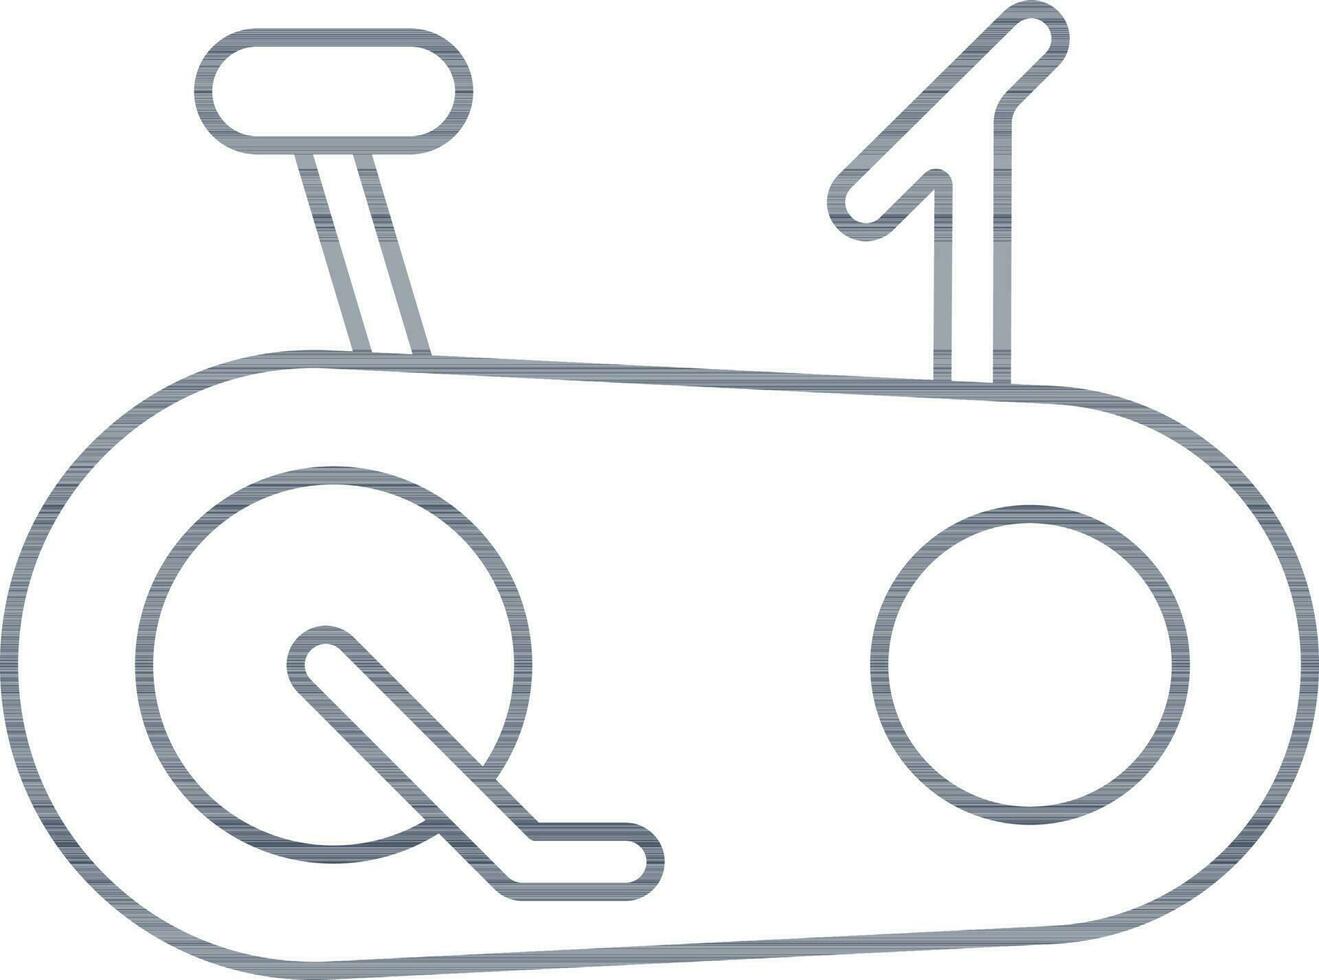 Blue Outline Exercise Bike Icon Or Symbol. vector